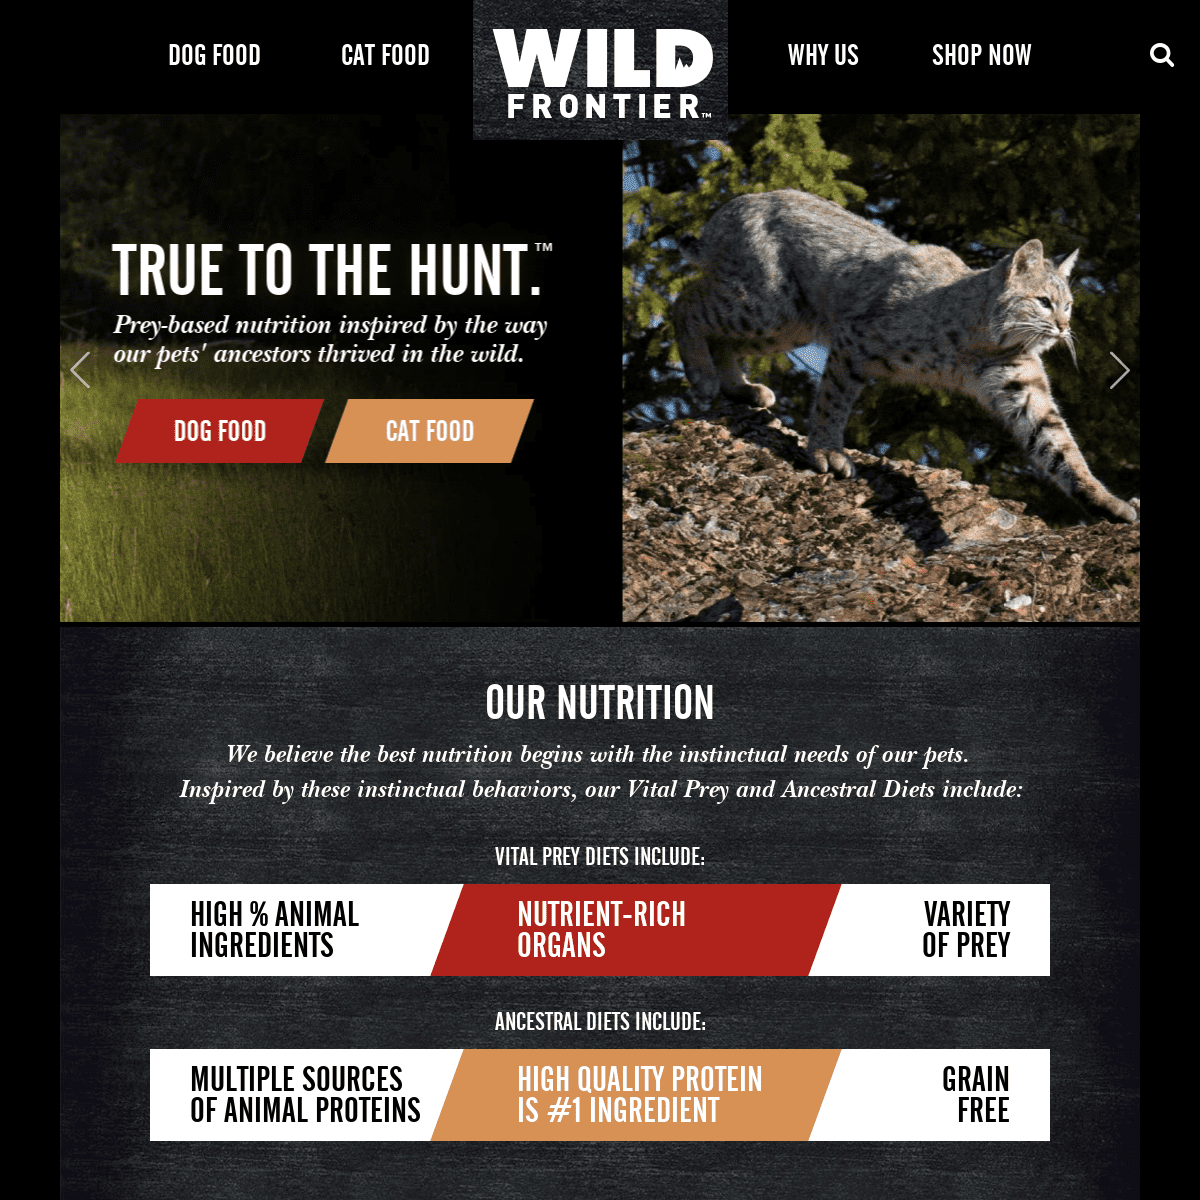 A complete backup of wildfrontier.com